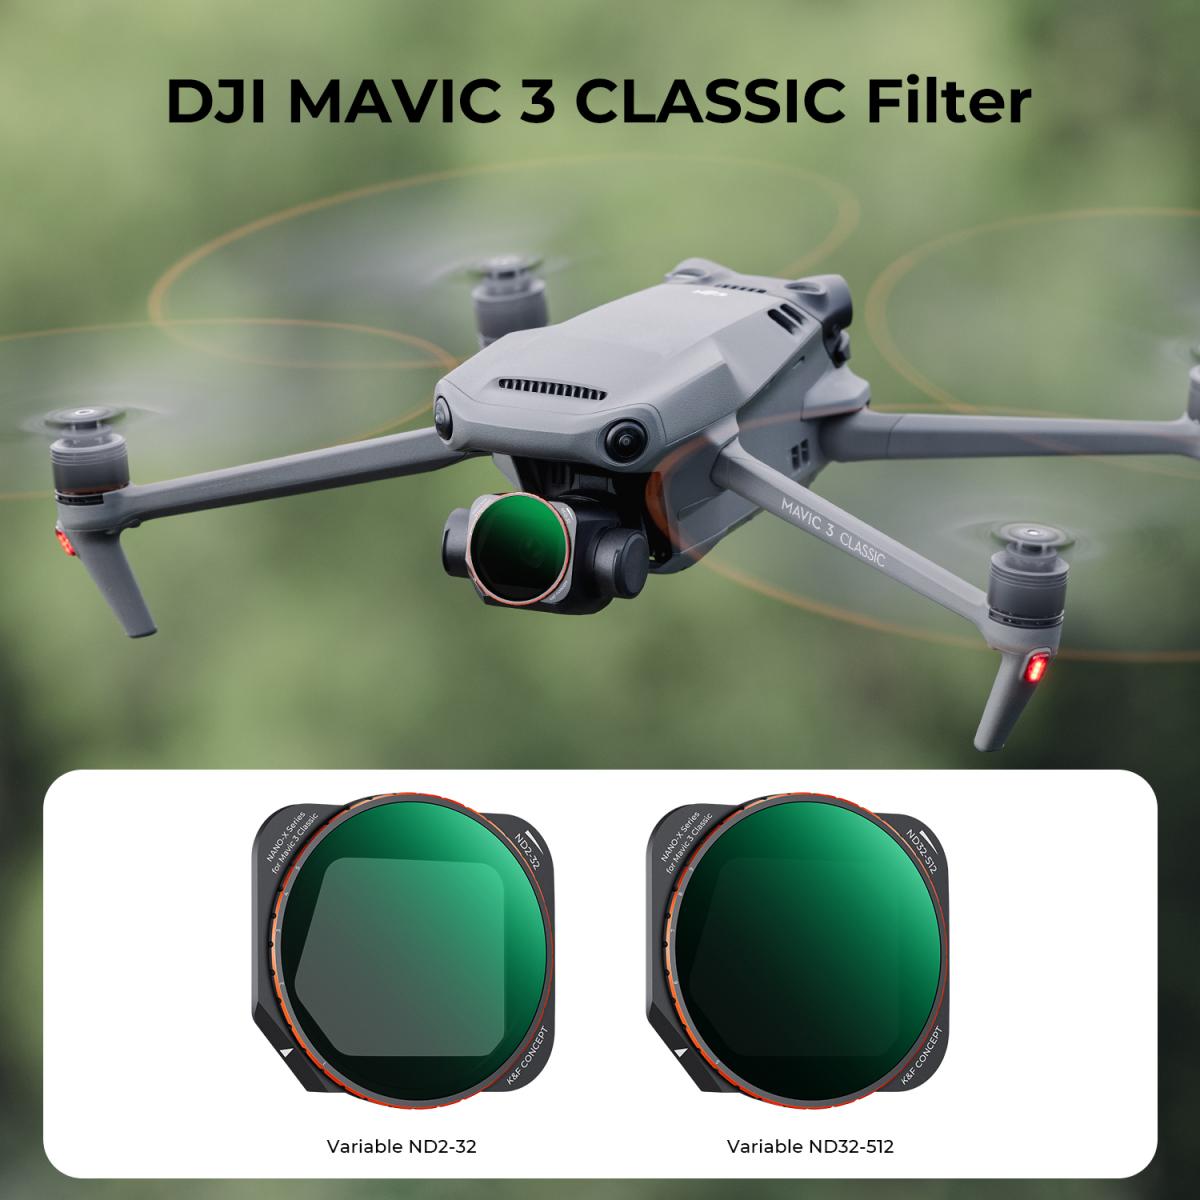 DJI Mavic 3 Classic Variable ND Filters Kit 2 pcs ND2-32+ ND32-512 with Single-sided Anti-reflection Green Film Waterproof and Scratch-resistant